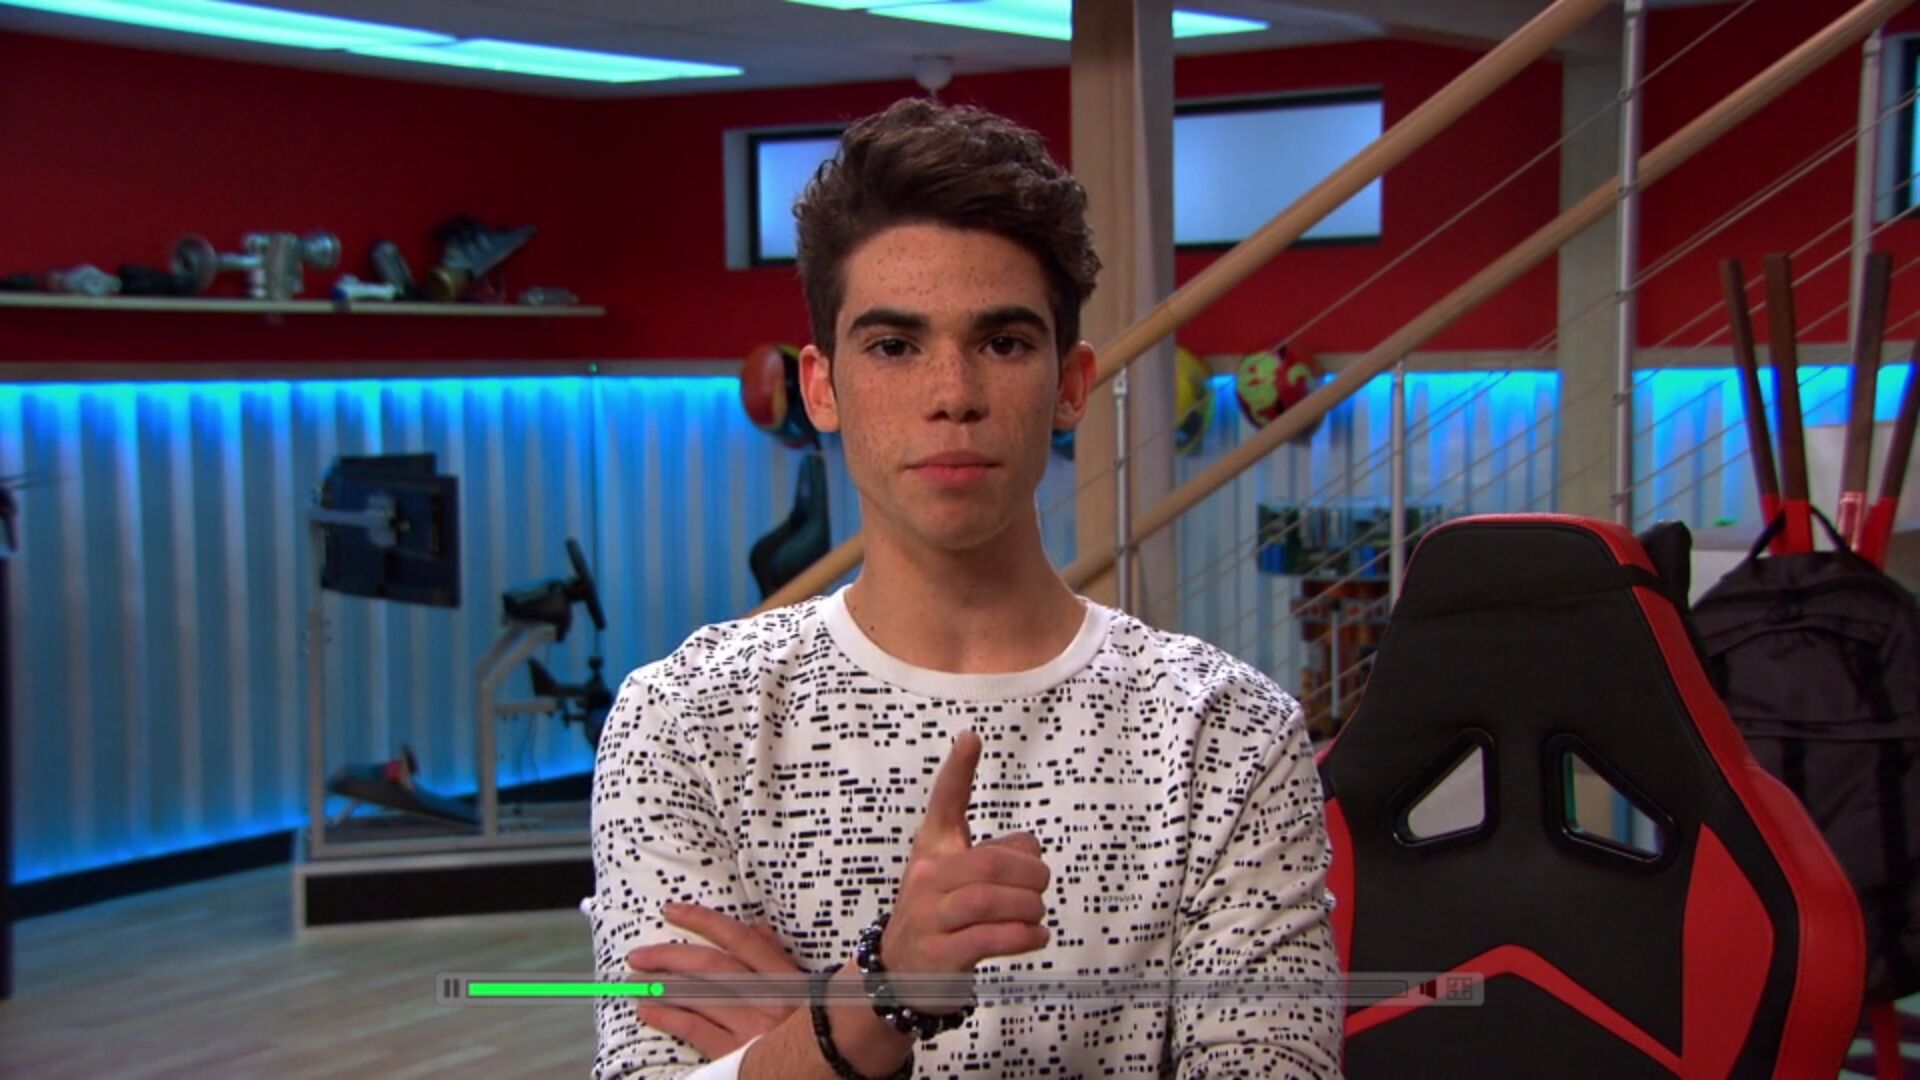 Cameron Boyce in Gamer's Guide to Pretty Much Everything, episode: The Protégé